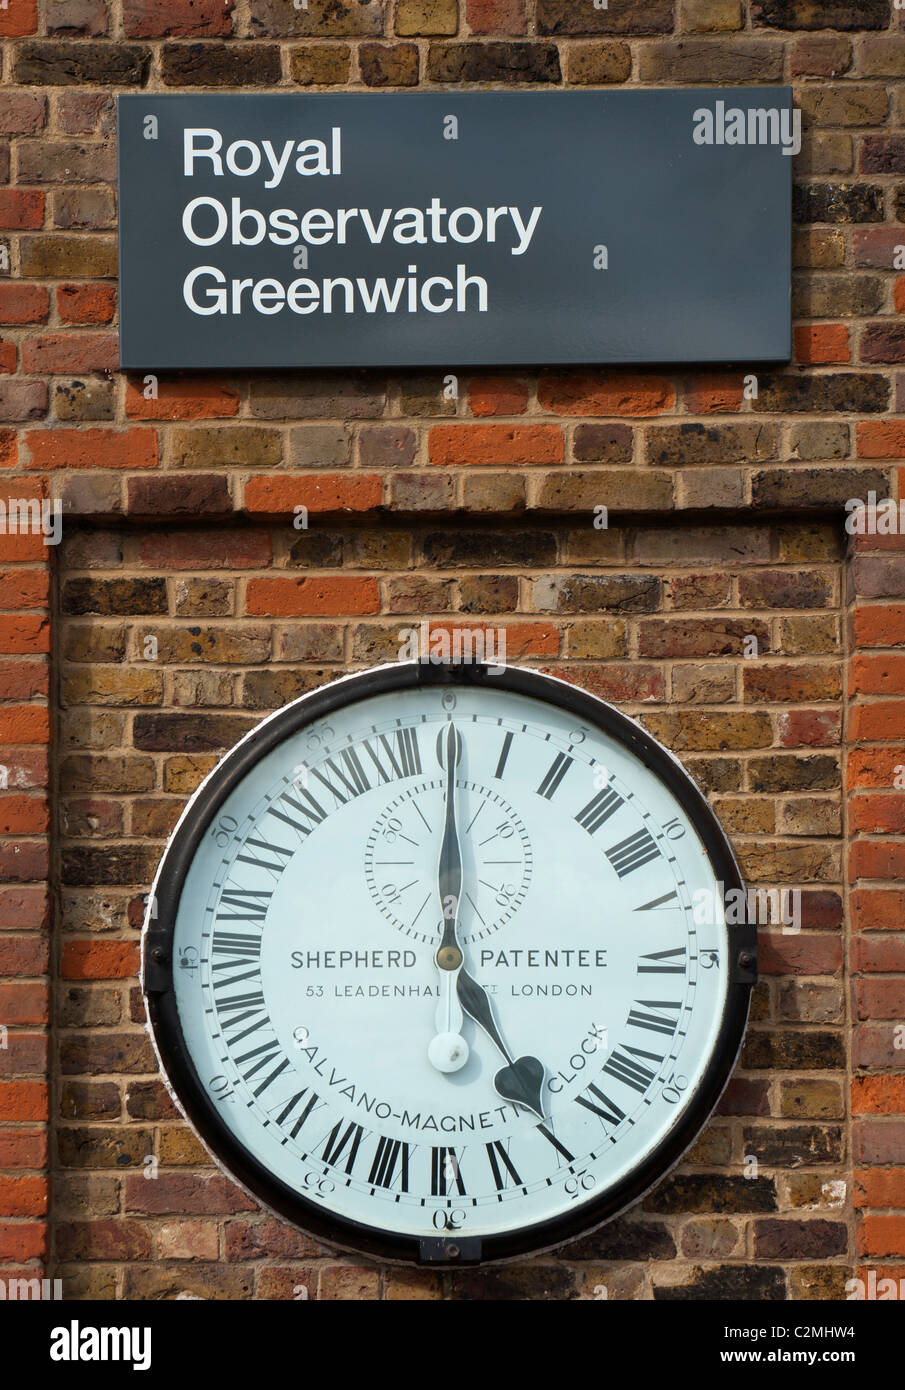 royal observatory meridian Greenwich England time Stock Photo